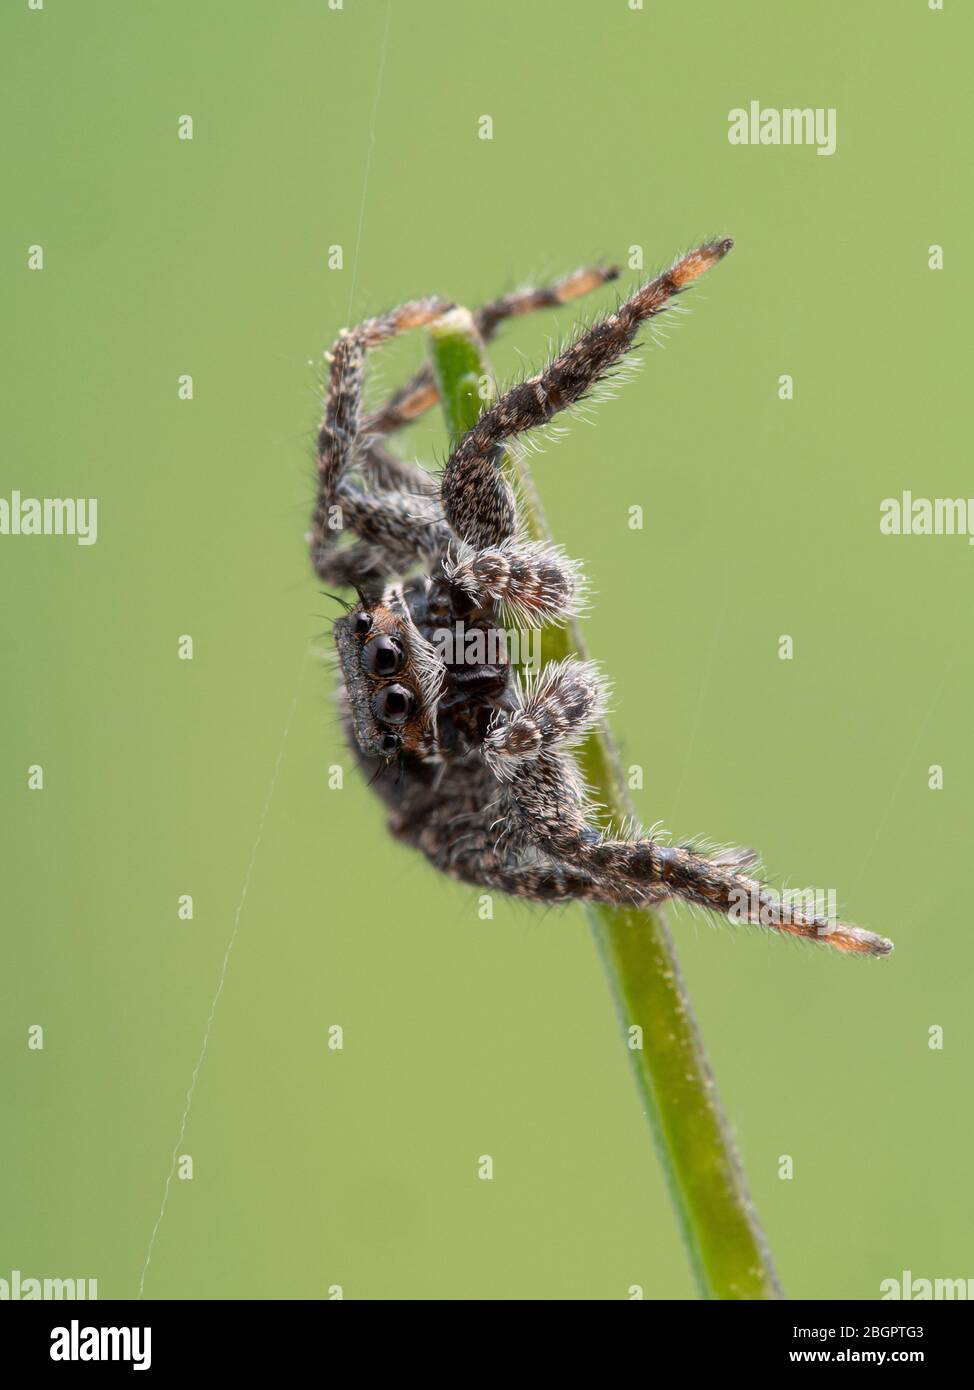 A cute jumping spider (Platycryptus californicus) posing sidewise on a plant stem, facing the camera. Photographed in Delta, British Columbia, Canada Stock Photo